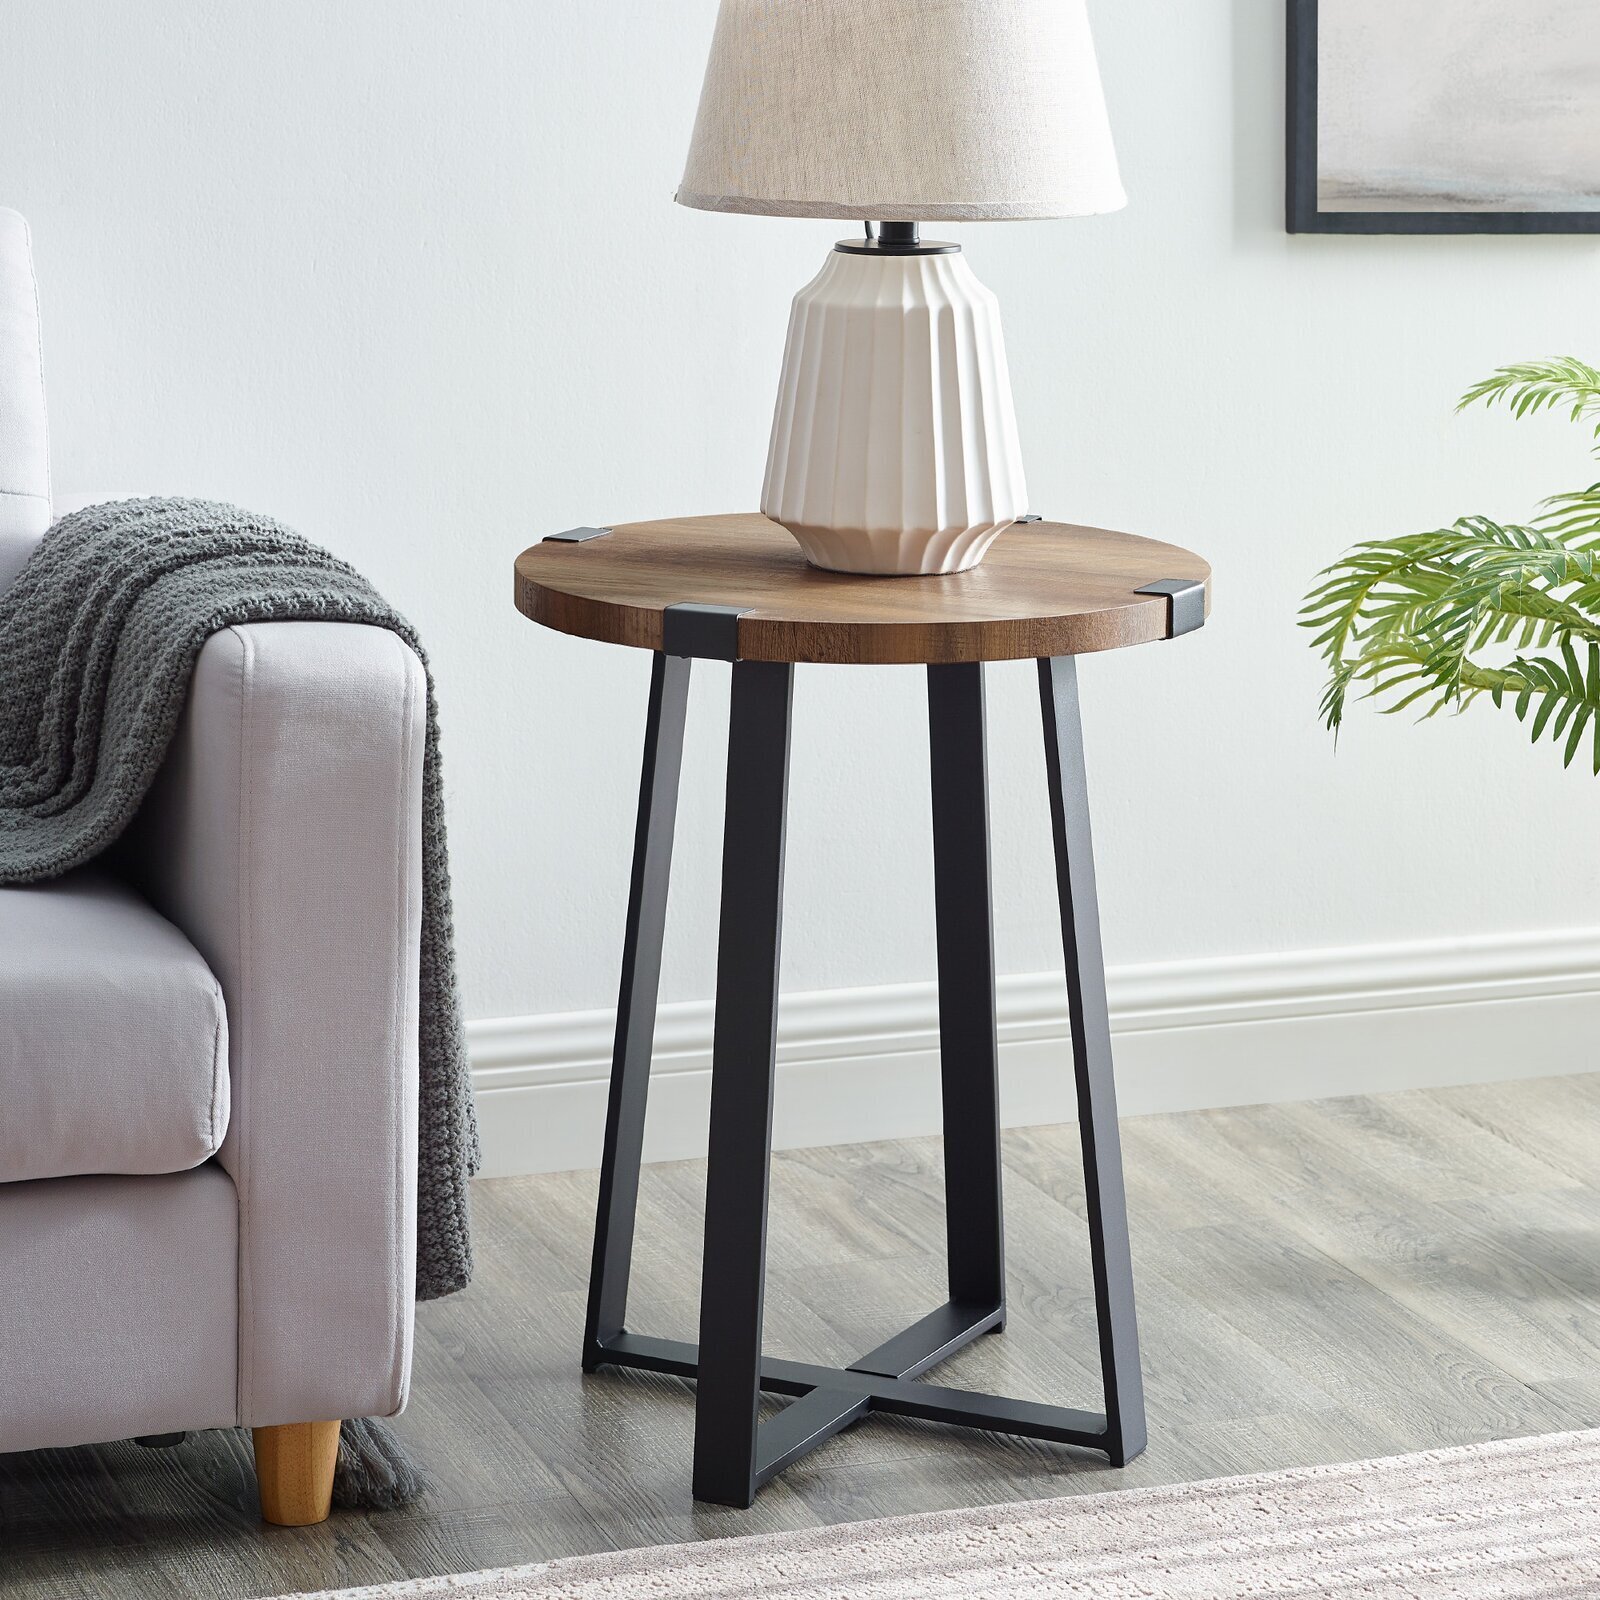 Simplistic Metal and Wood Round Table for Speakers